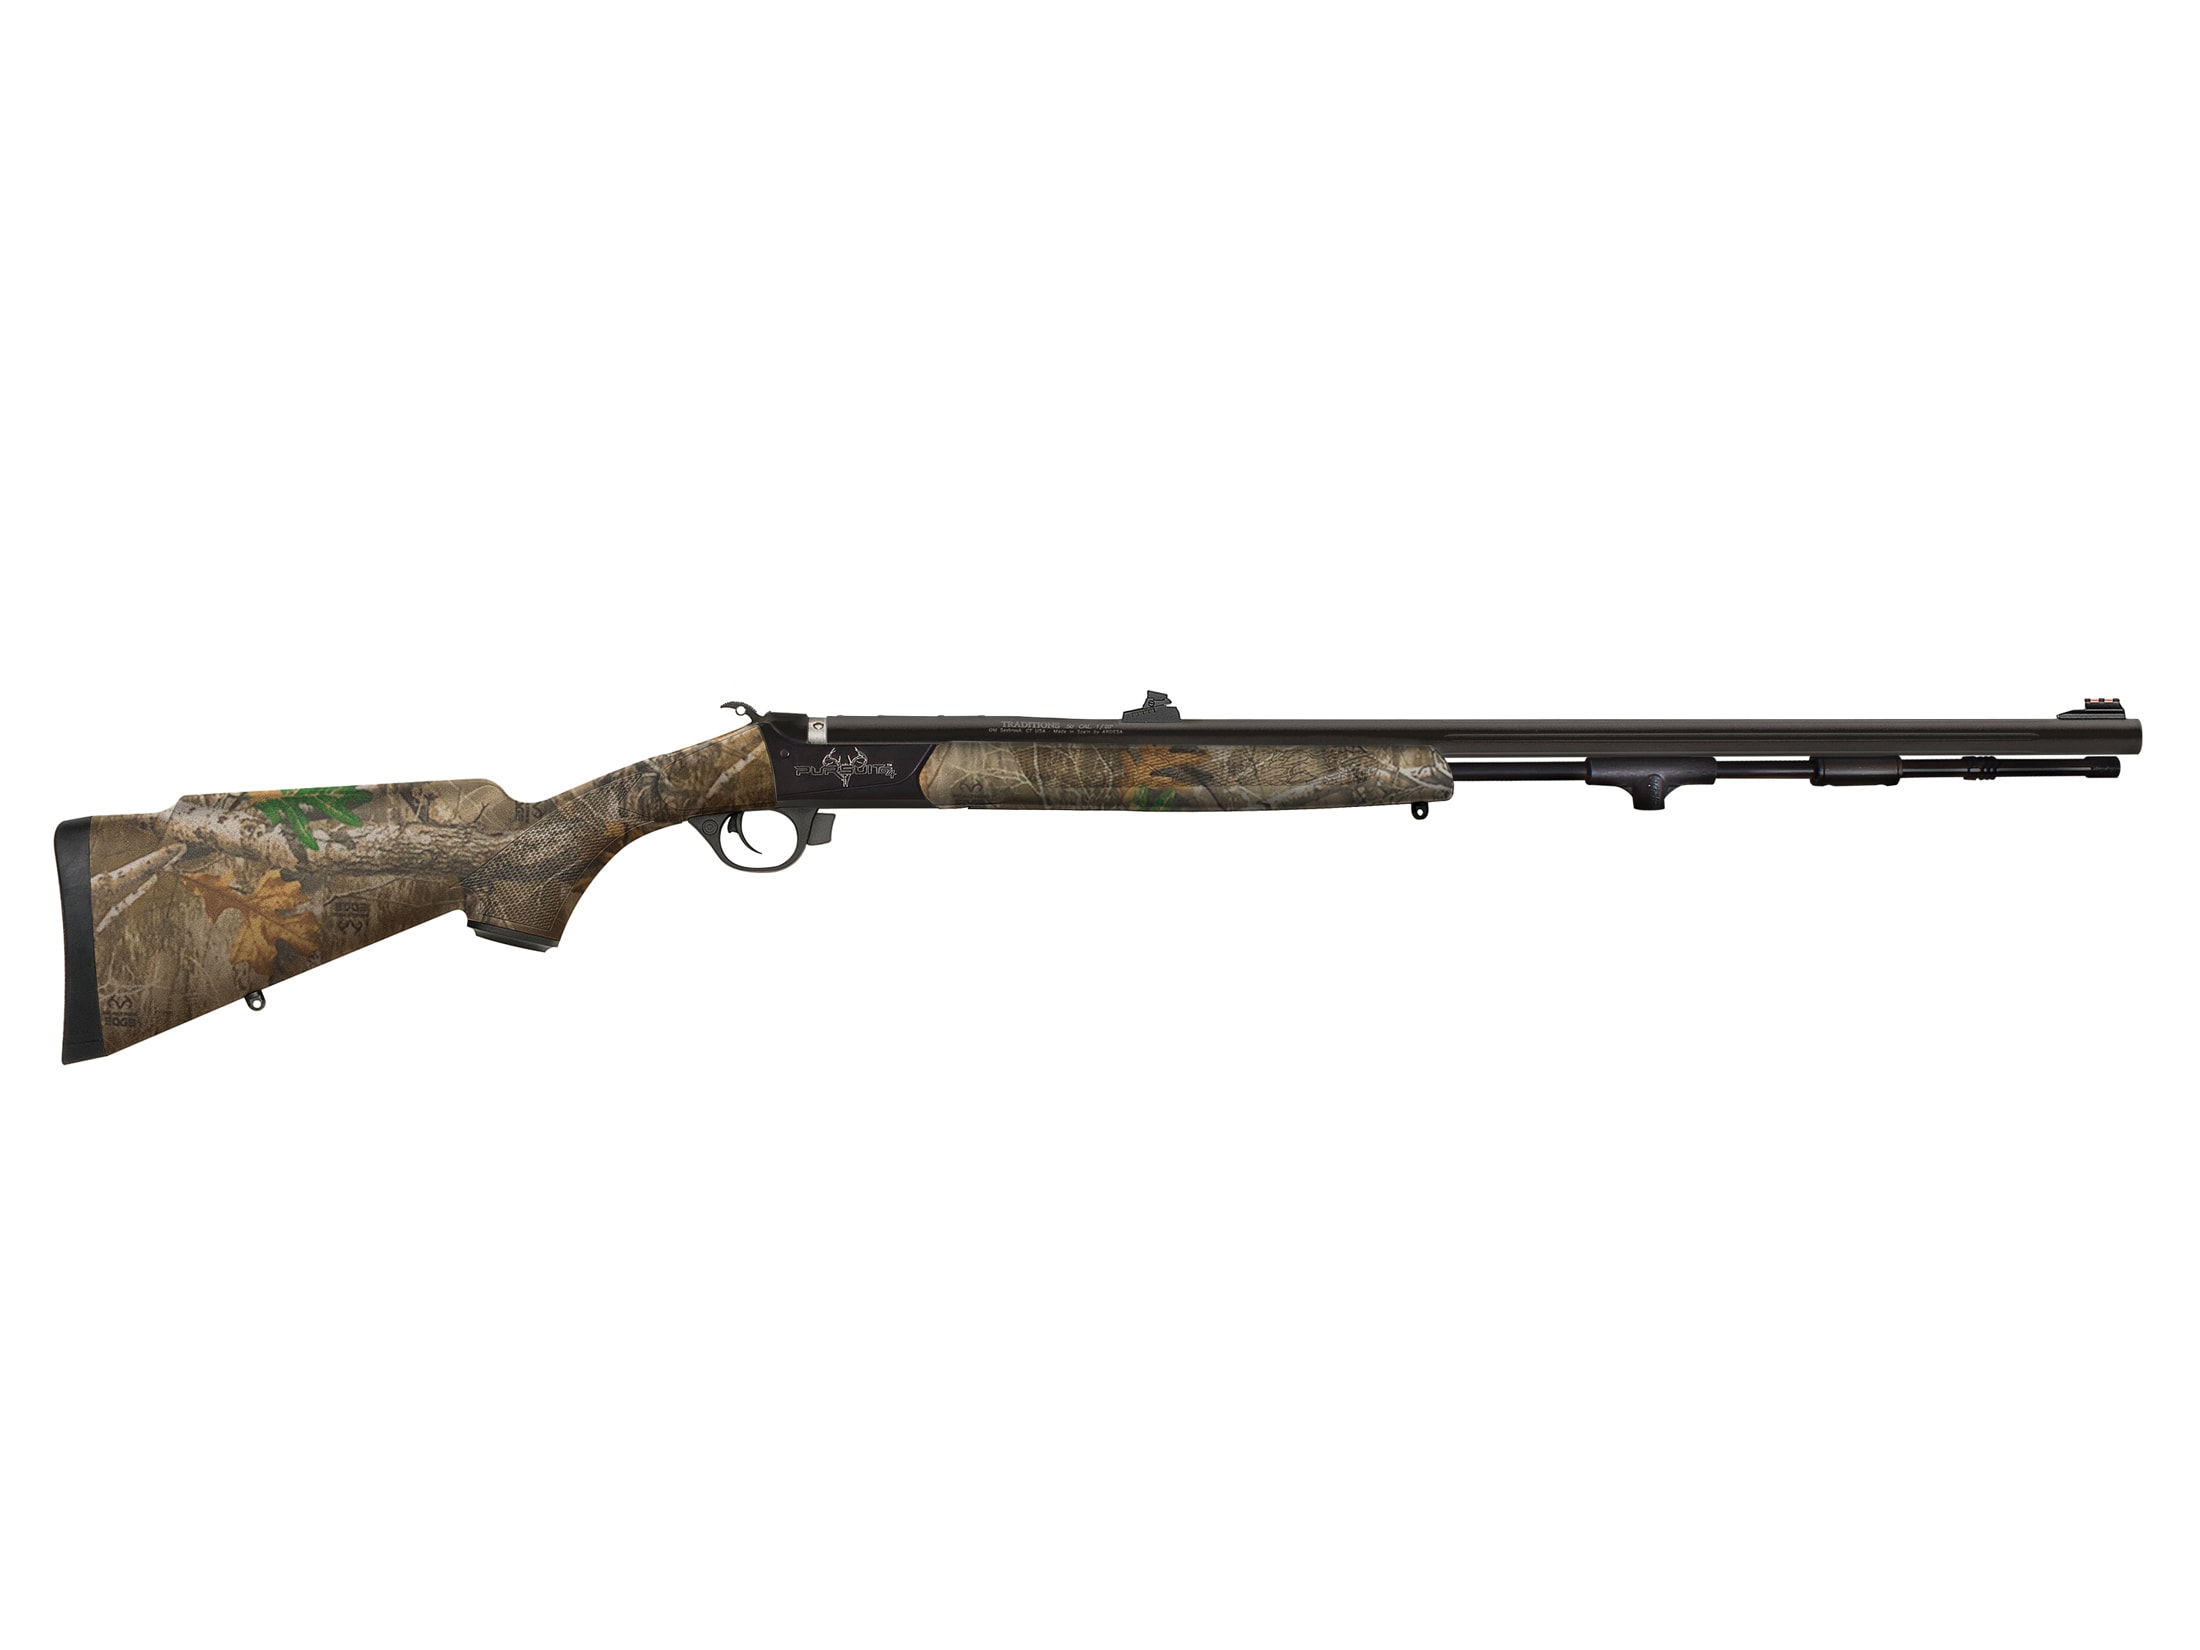 Image of Traditions Pursuit G4 Ultralight Muzzleloading Rifle 50 Caliber 26" Nitride Barrel Synthetic Stock Realtree Edge